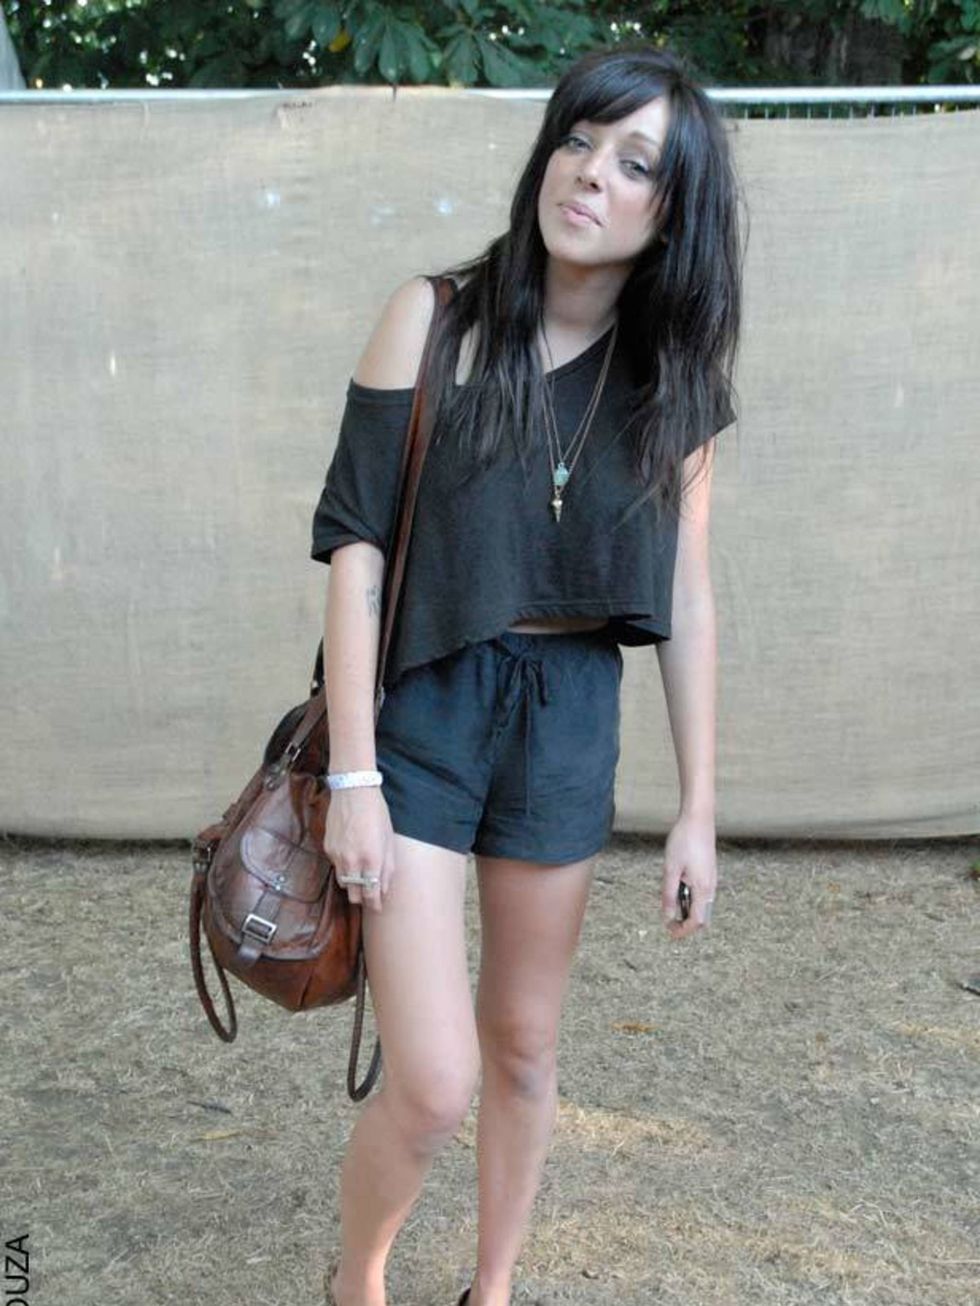 <p>Kirsty McKie, 26, Assistant Producer. American Apparel t-shirt, borrowed shorts, Jeffrey Campbell shoes, vintage bag. </p>